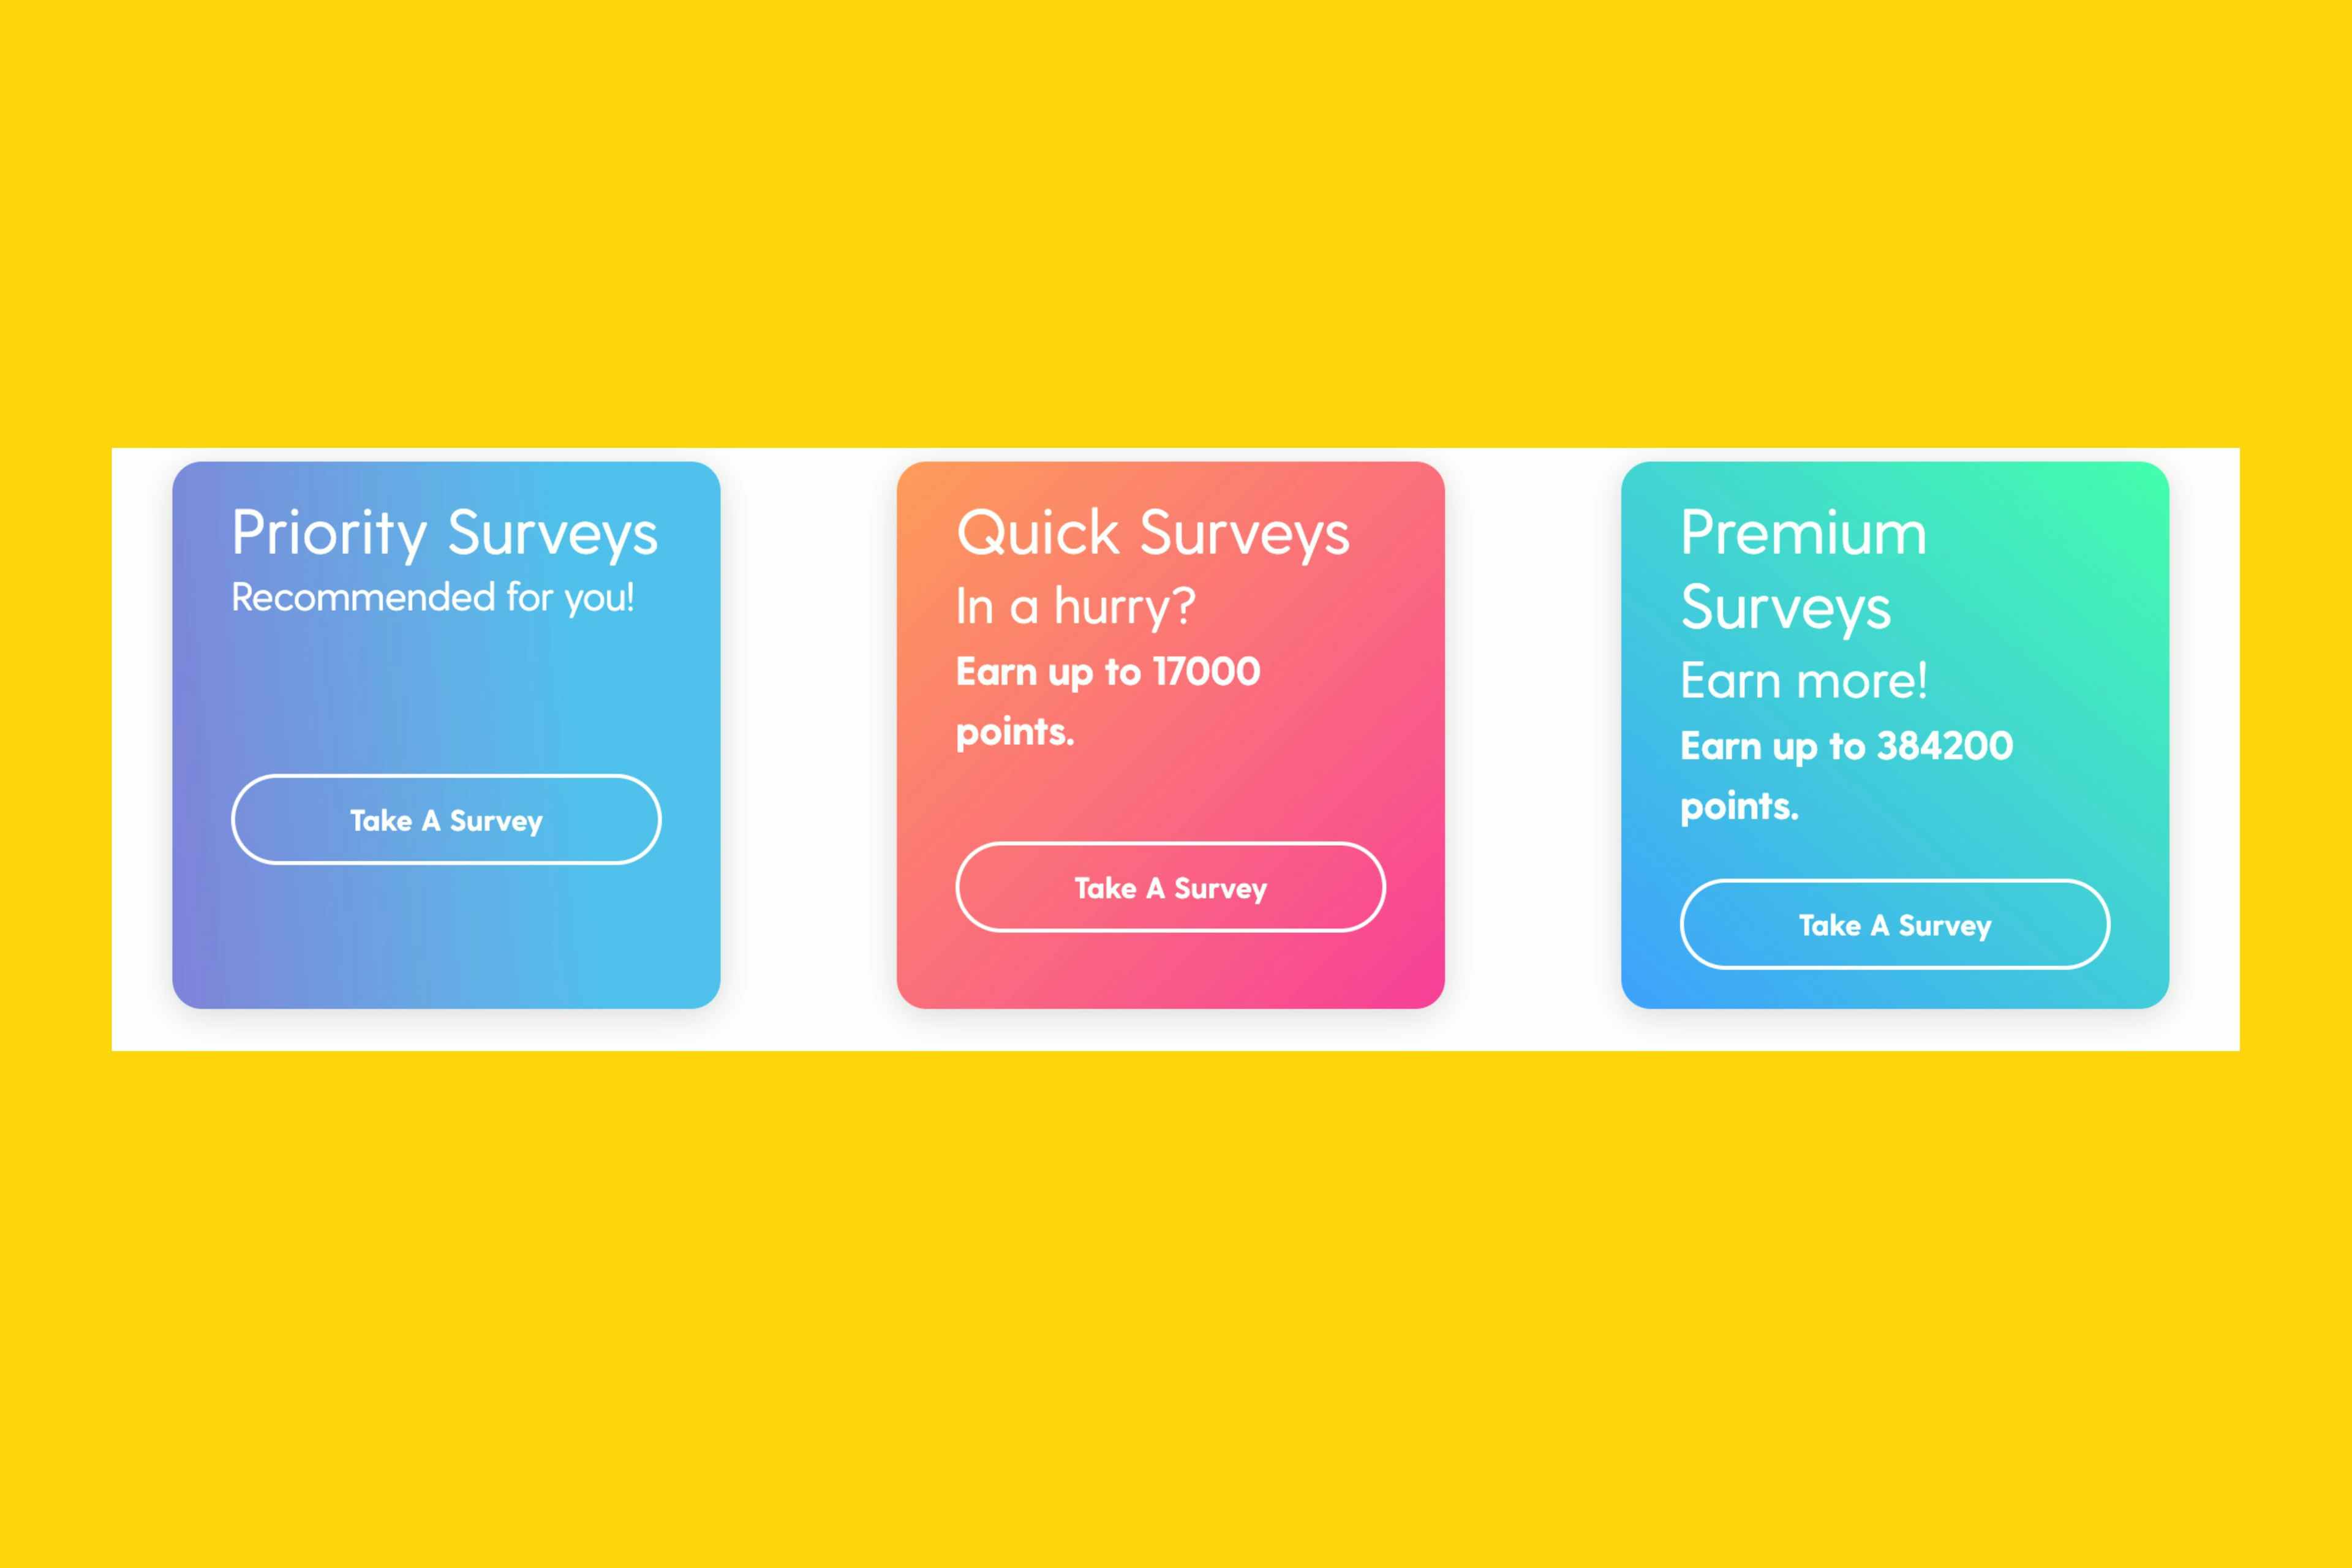 A series of multicolored boxes with text on a yellow background